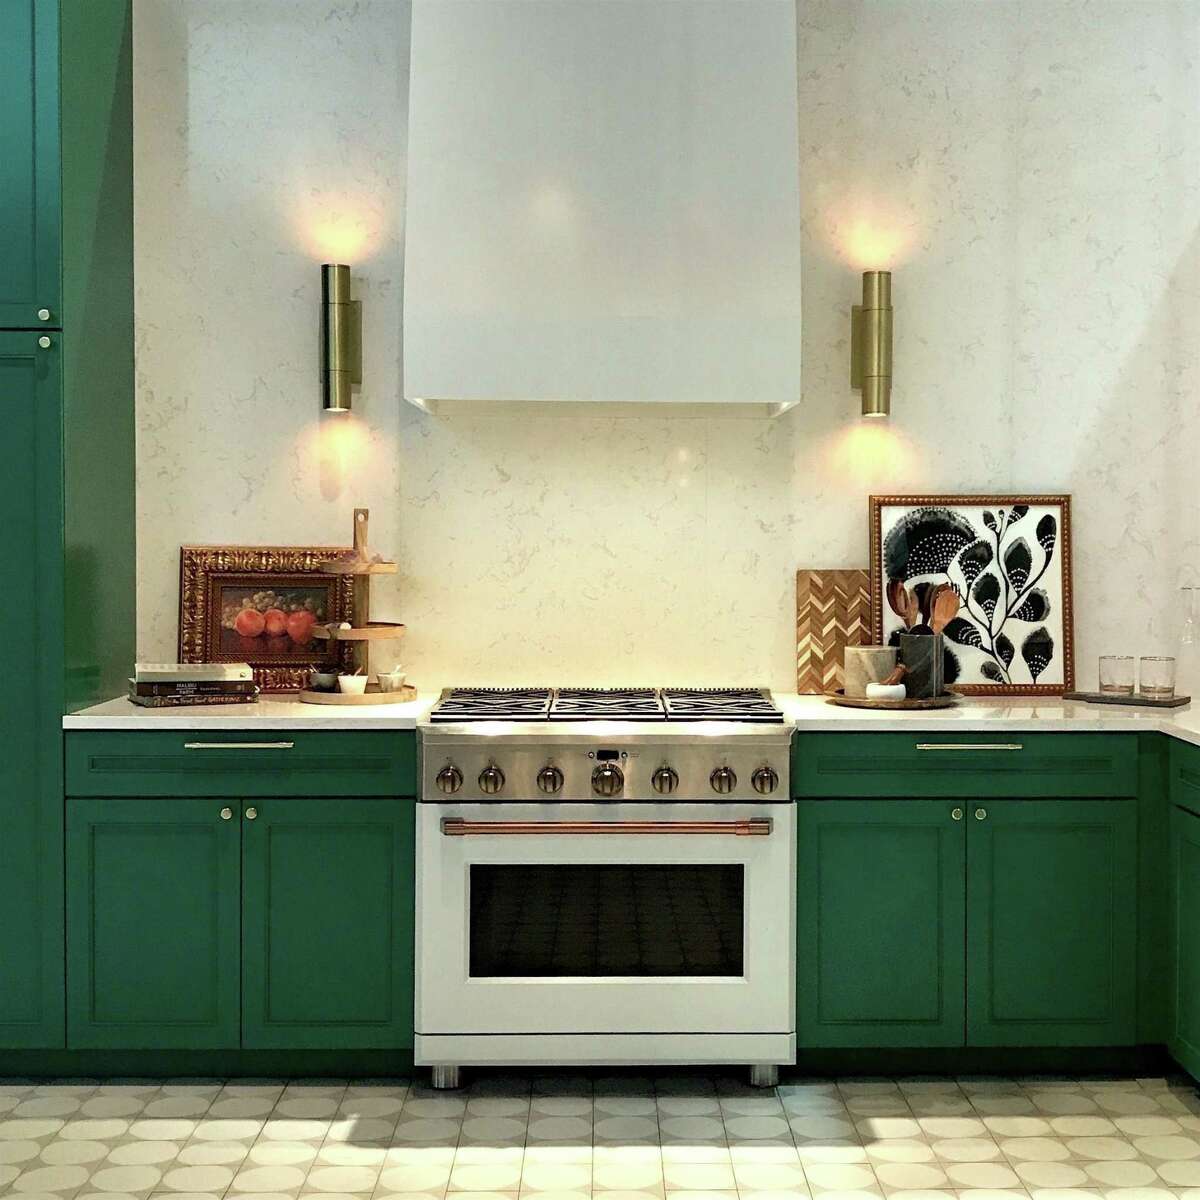 GE was a little ahead of its time for its 2019 Kitchen and Bath trade show in Las Vegas, creating emerald green cabinets for a vignette featuring its higher-end GE Cafe line of ranges and range hoods. More colorful rooms --- especially in green -- will be a big trend for 2022.